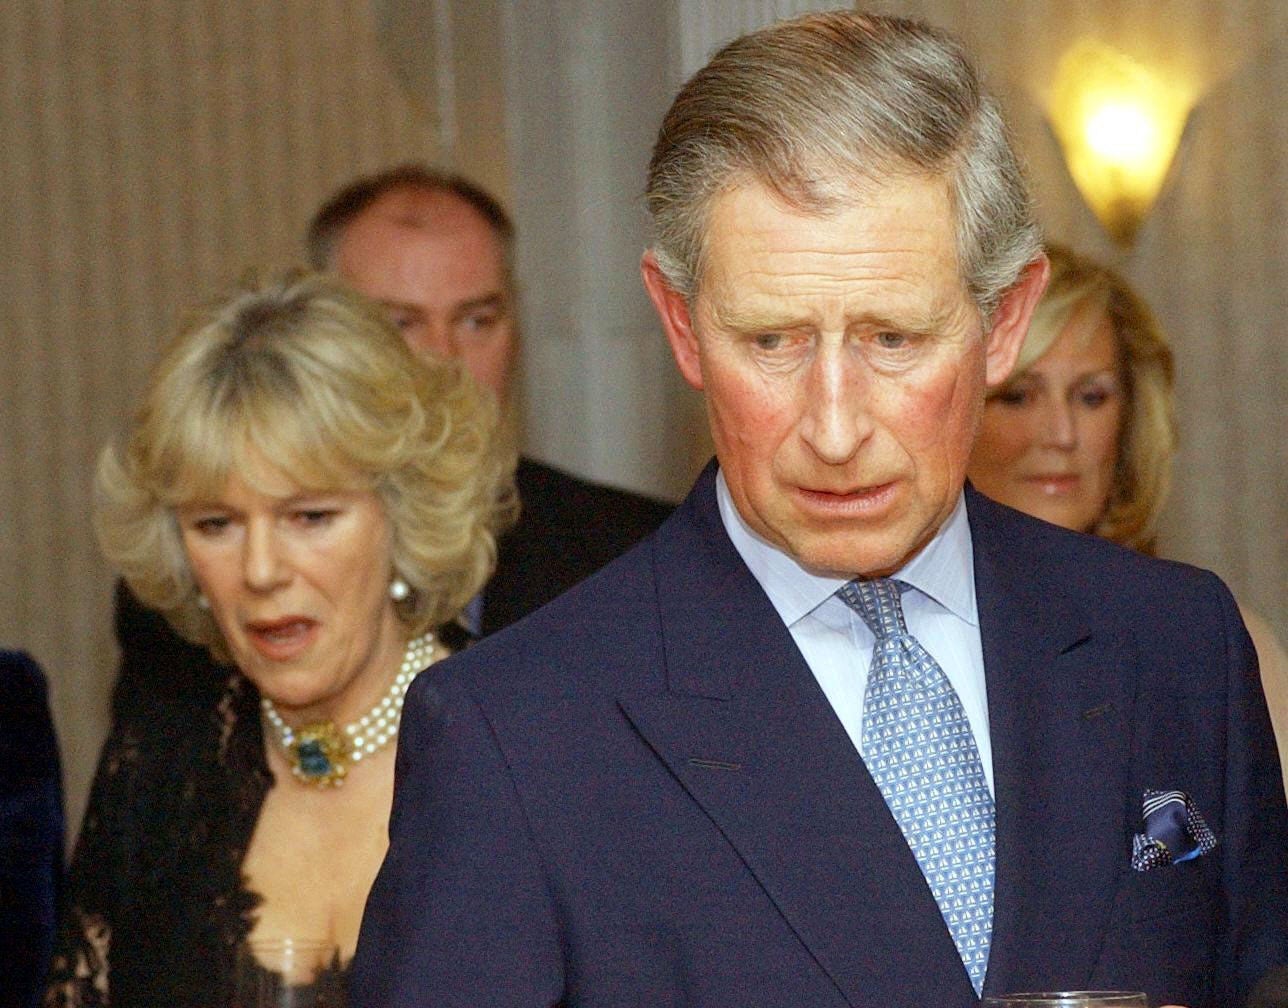 the crown, elizabeth ii, netflix, king charles iii, prince charles, camilla parker bowles, princess diana, the crown season 5: what was the ‘tampongate’ scandal between charles and camilla?